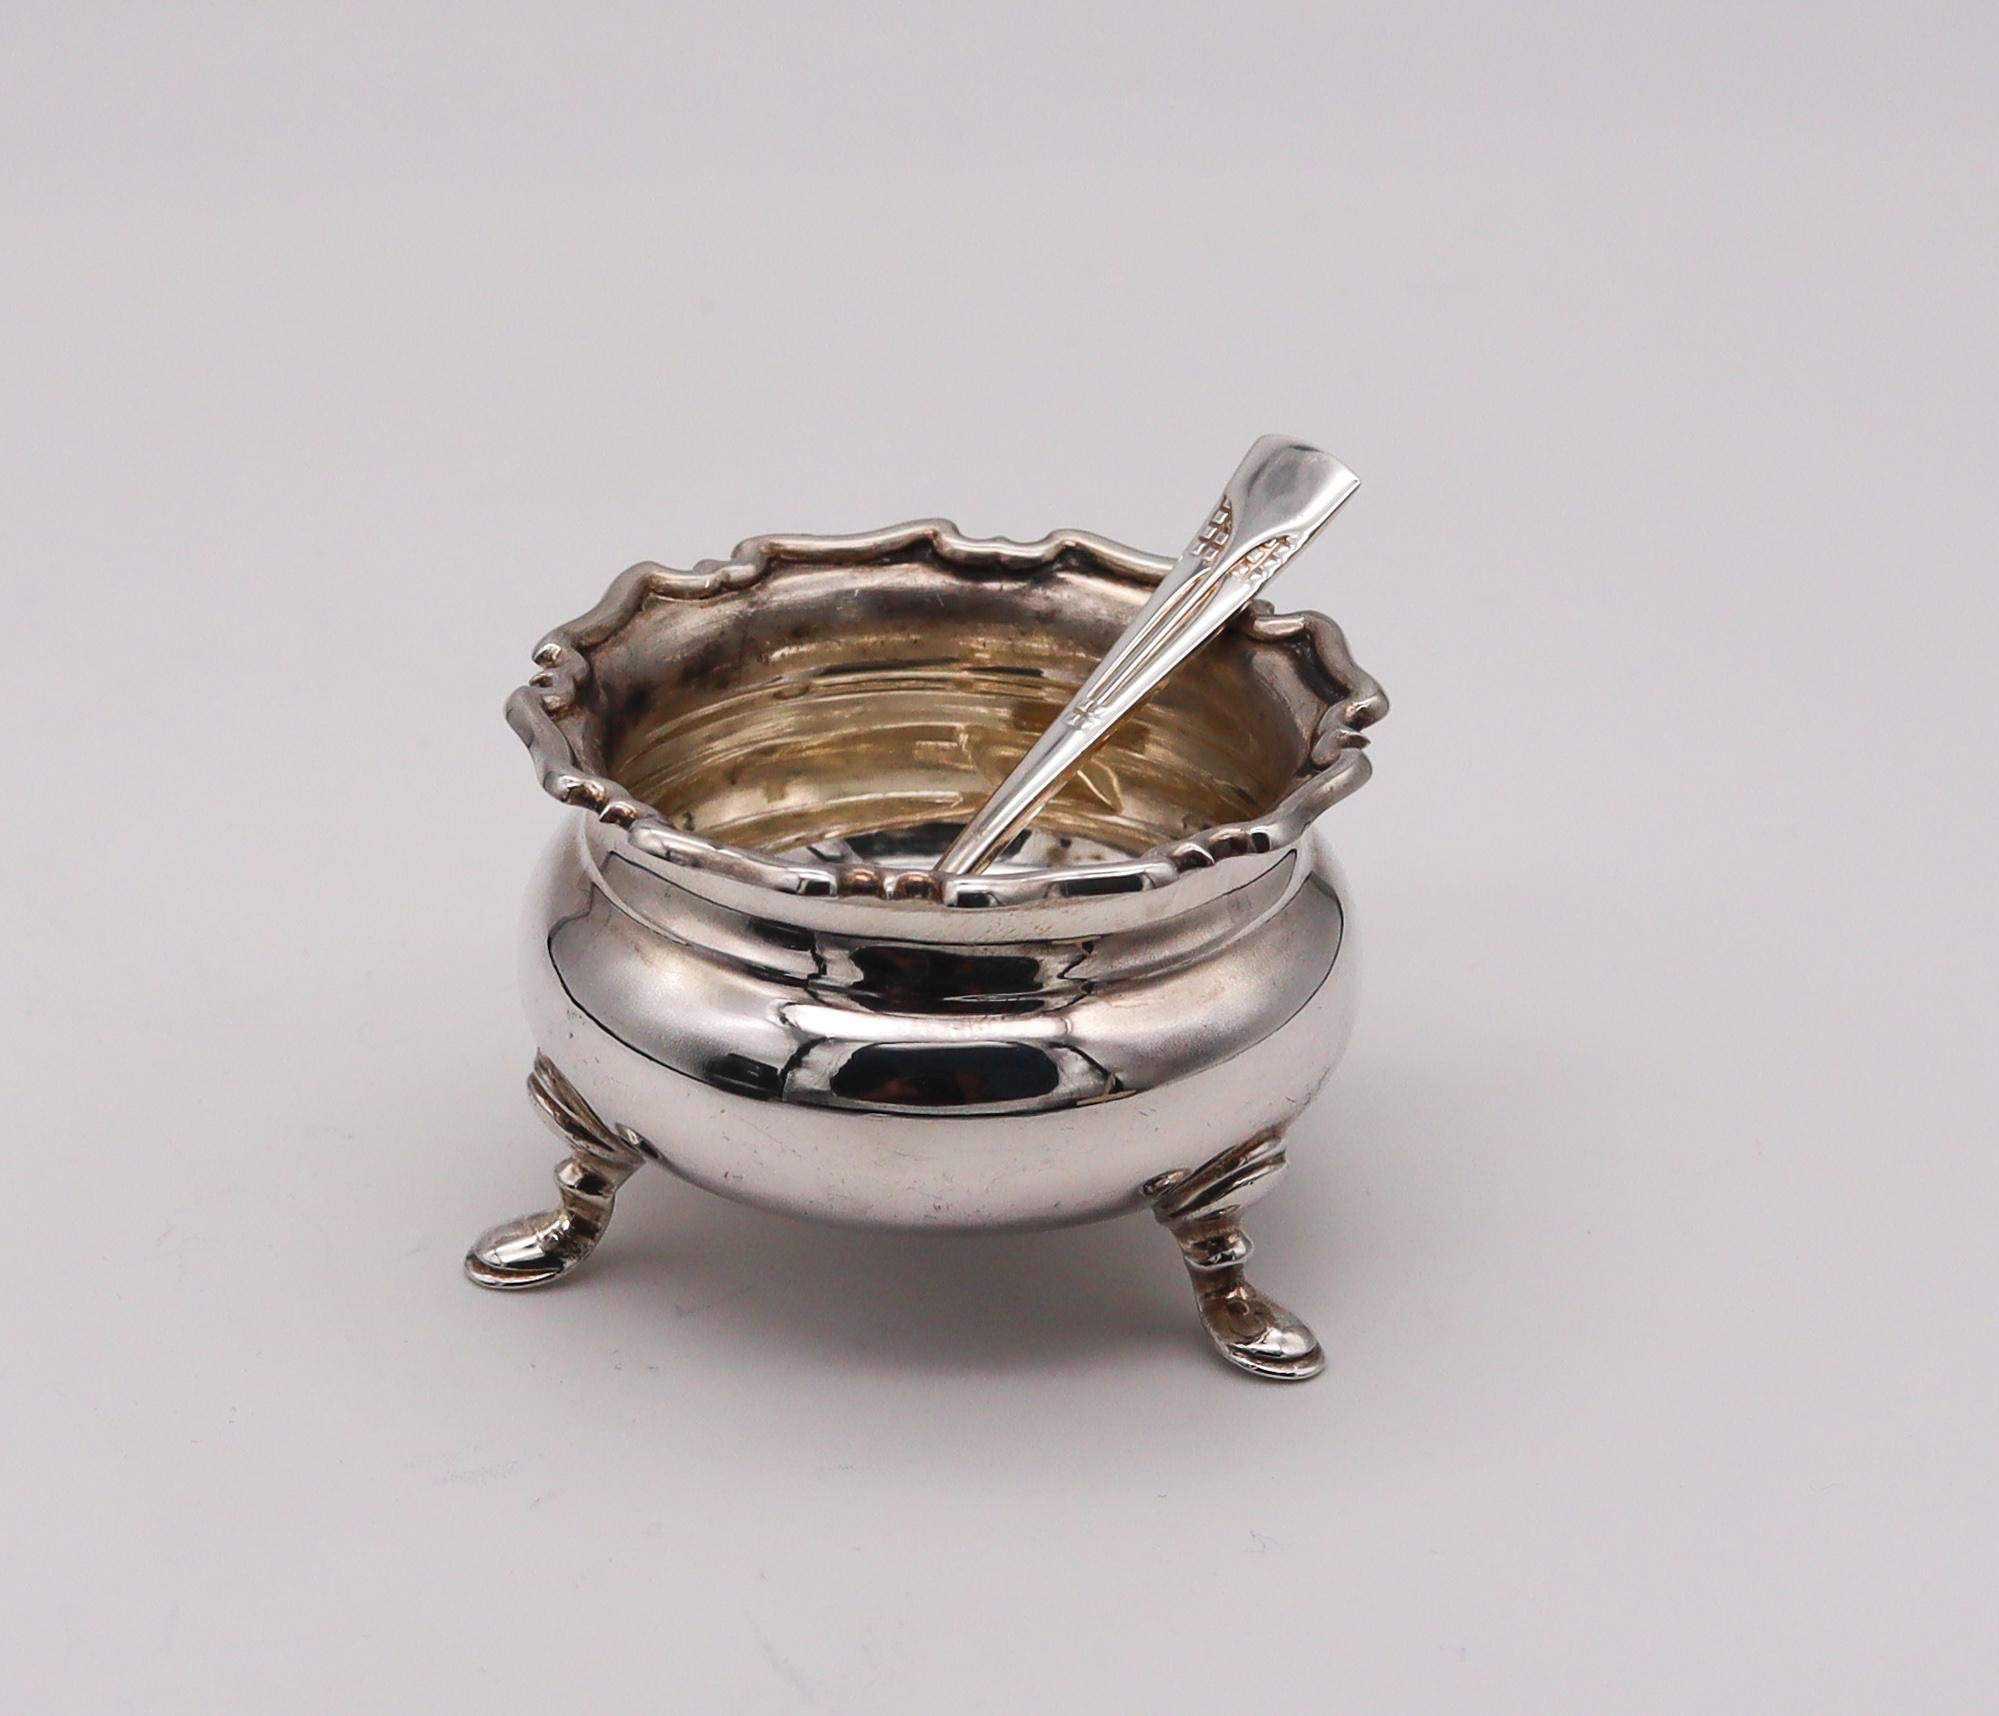 Hand-Crafted Atkin Brothers England 1912 Sheffield Salt Cellar with Spoon 925 Sterling Silver For Sale